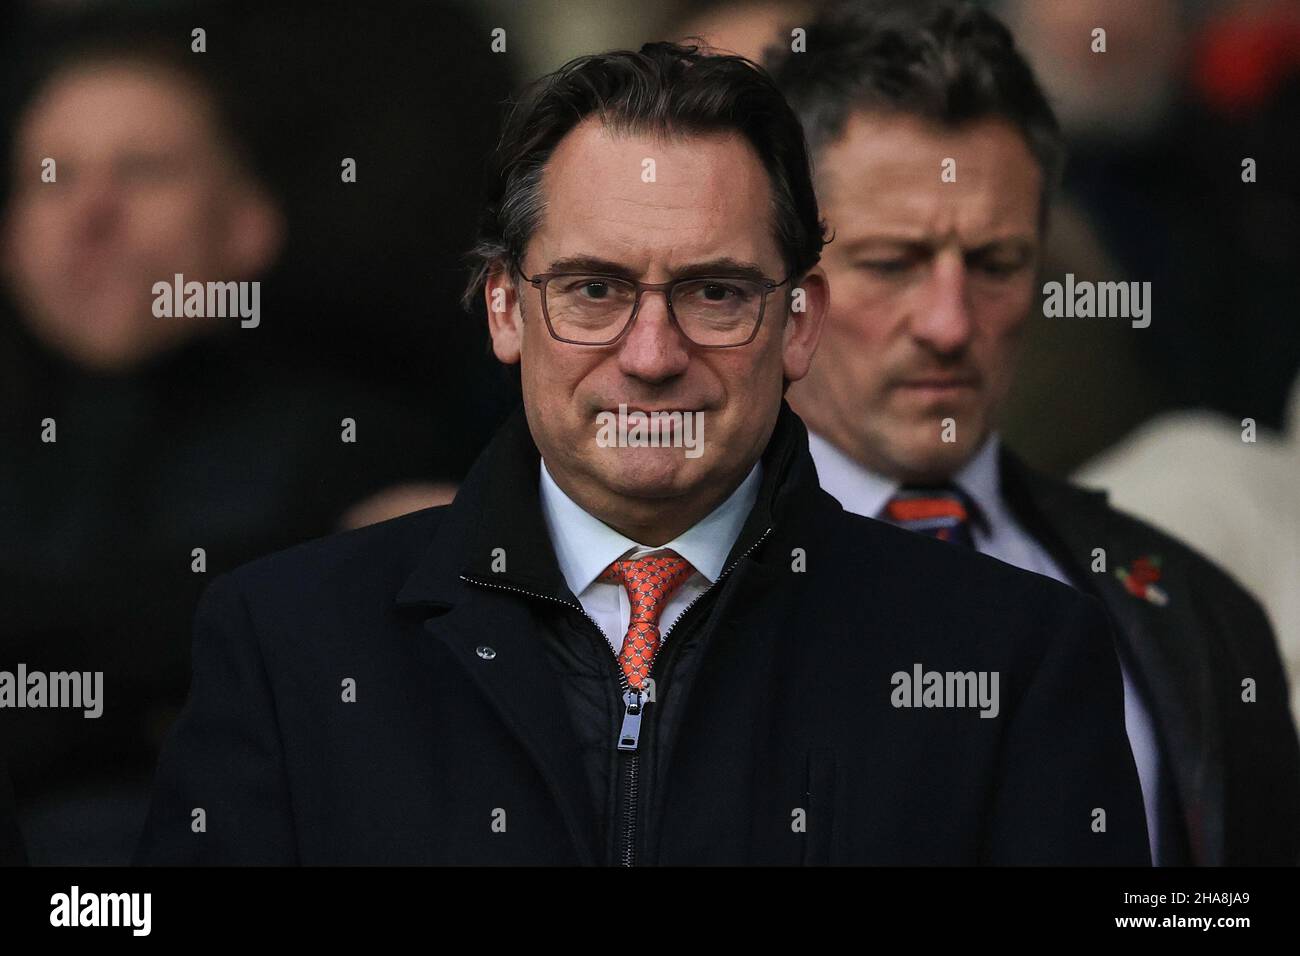 Derby, UK. 11th Dec, 2021. Simon Sadler owner of Blackpool Football Club is in attendance in Derby, United Kingdom on 12/11/2021. (Photo by Mark Cosgrove/News Images/Sipa USA) Credit: Sipa USA/Alamy Live News Stock Photo